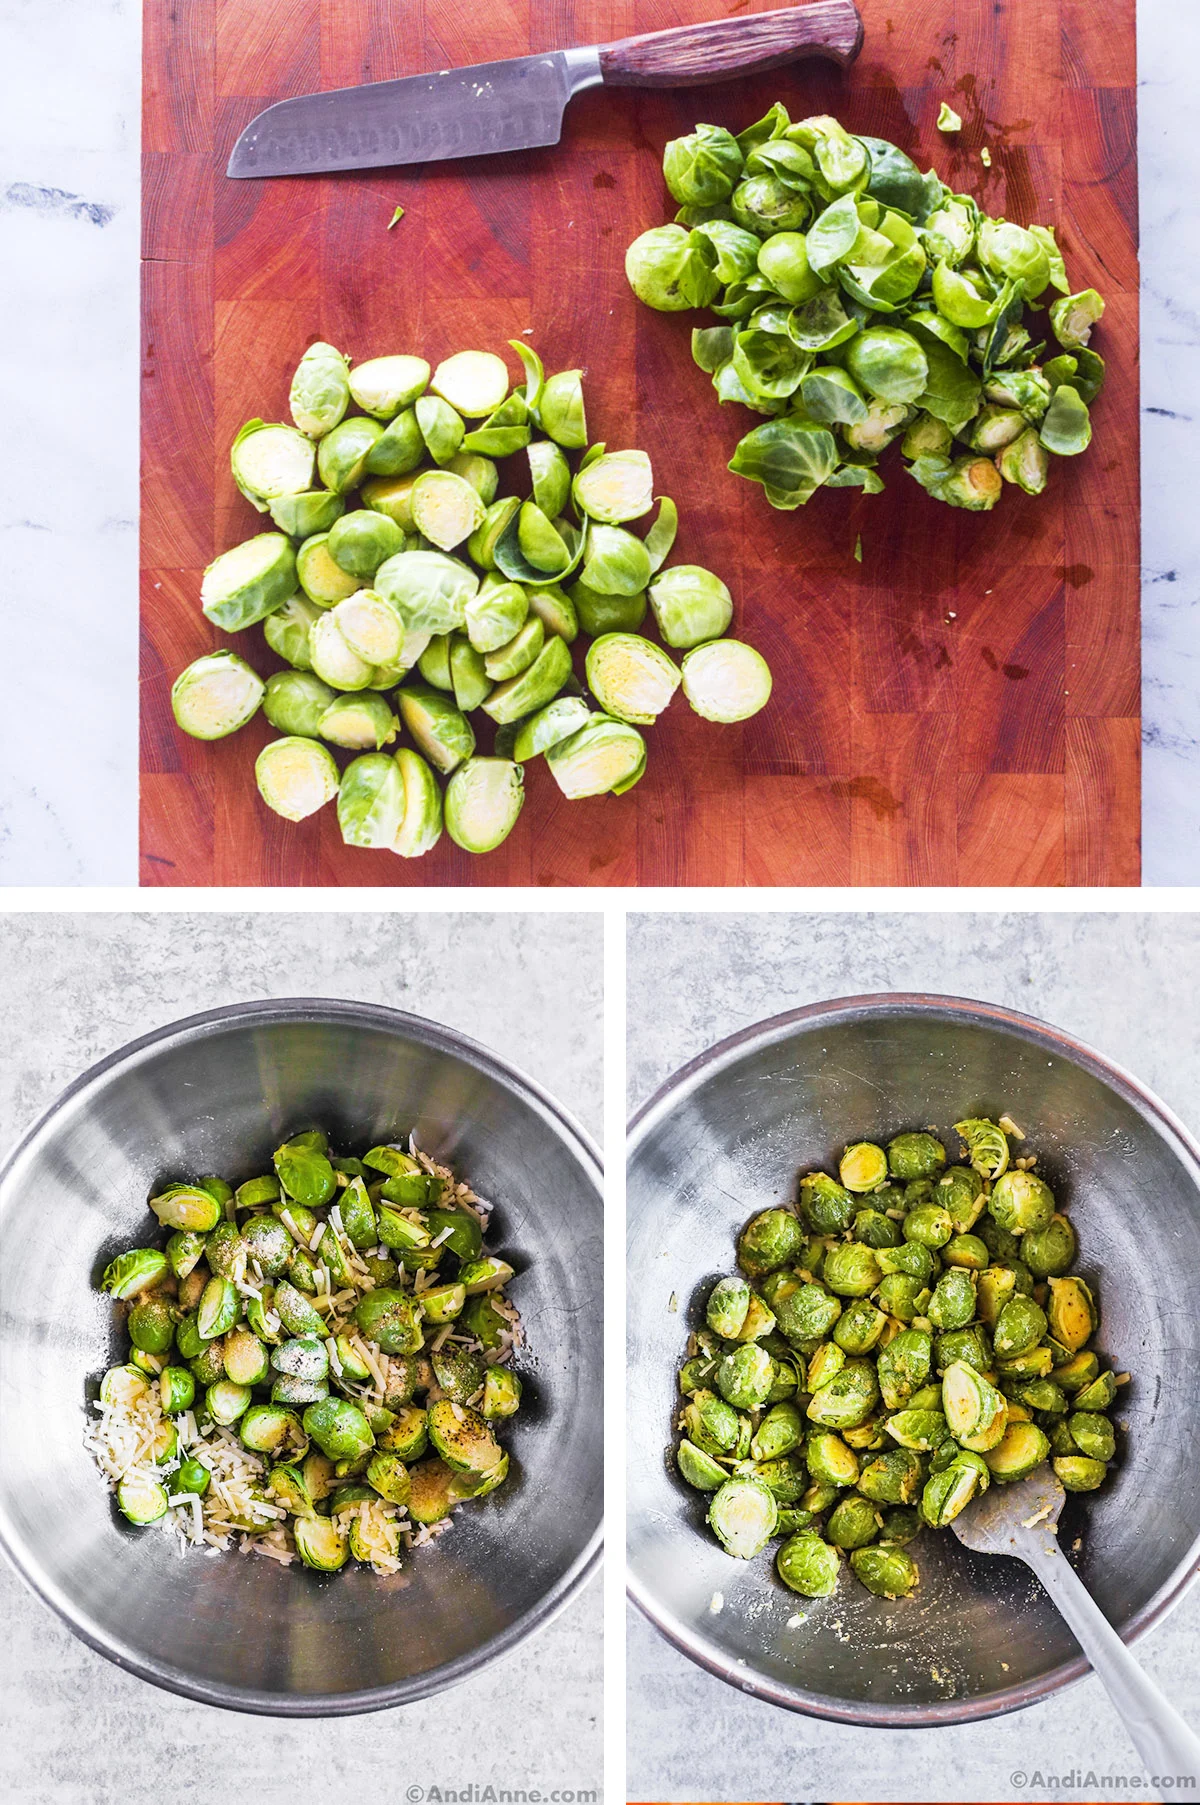 Three images, first is sliced brussels sprouts on cutting board, second and third are brussels sprouts in a large bowl with parmesan cheese and spices.